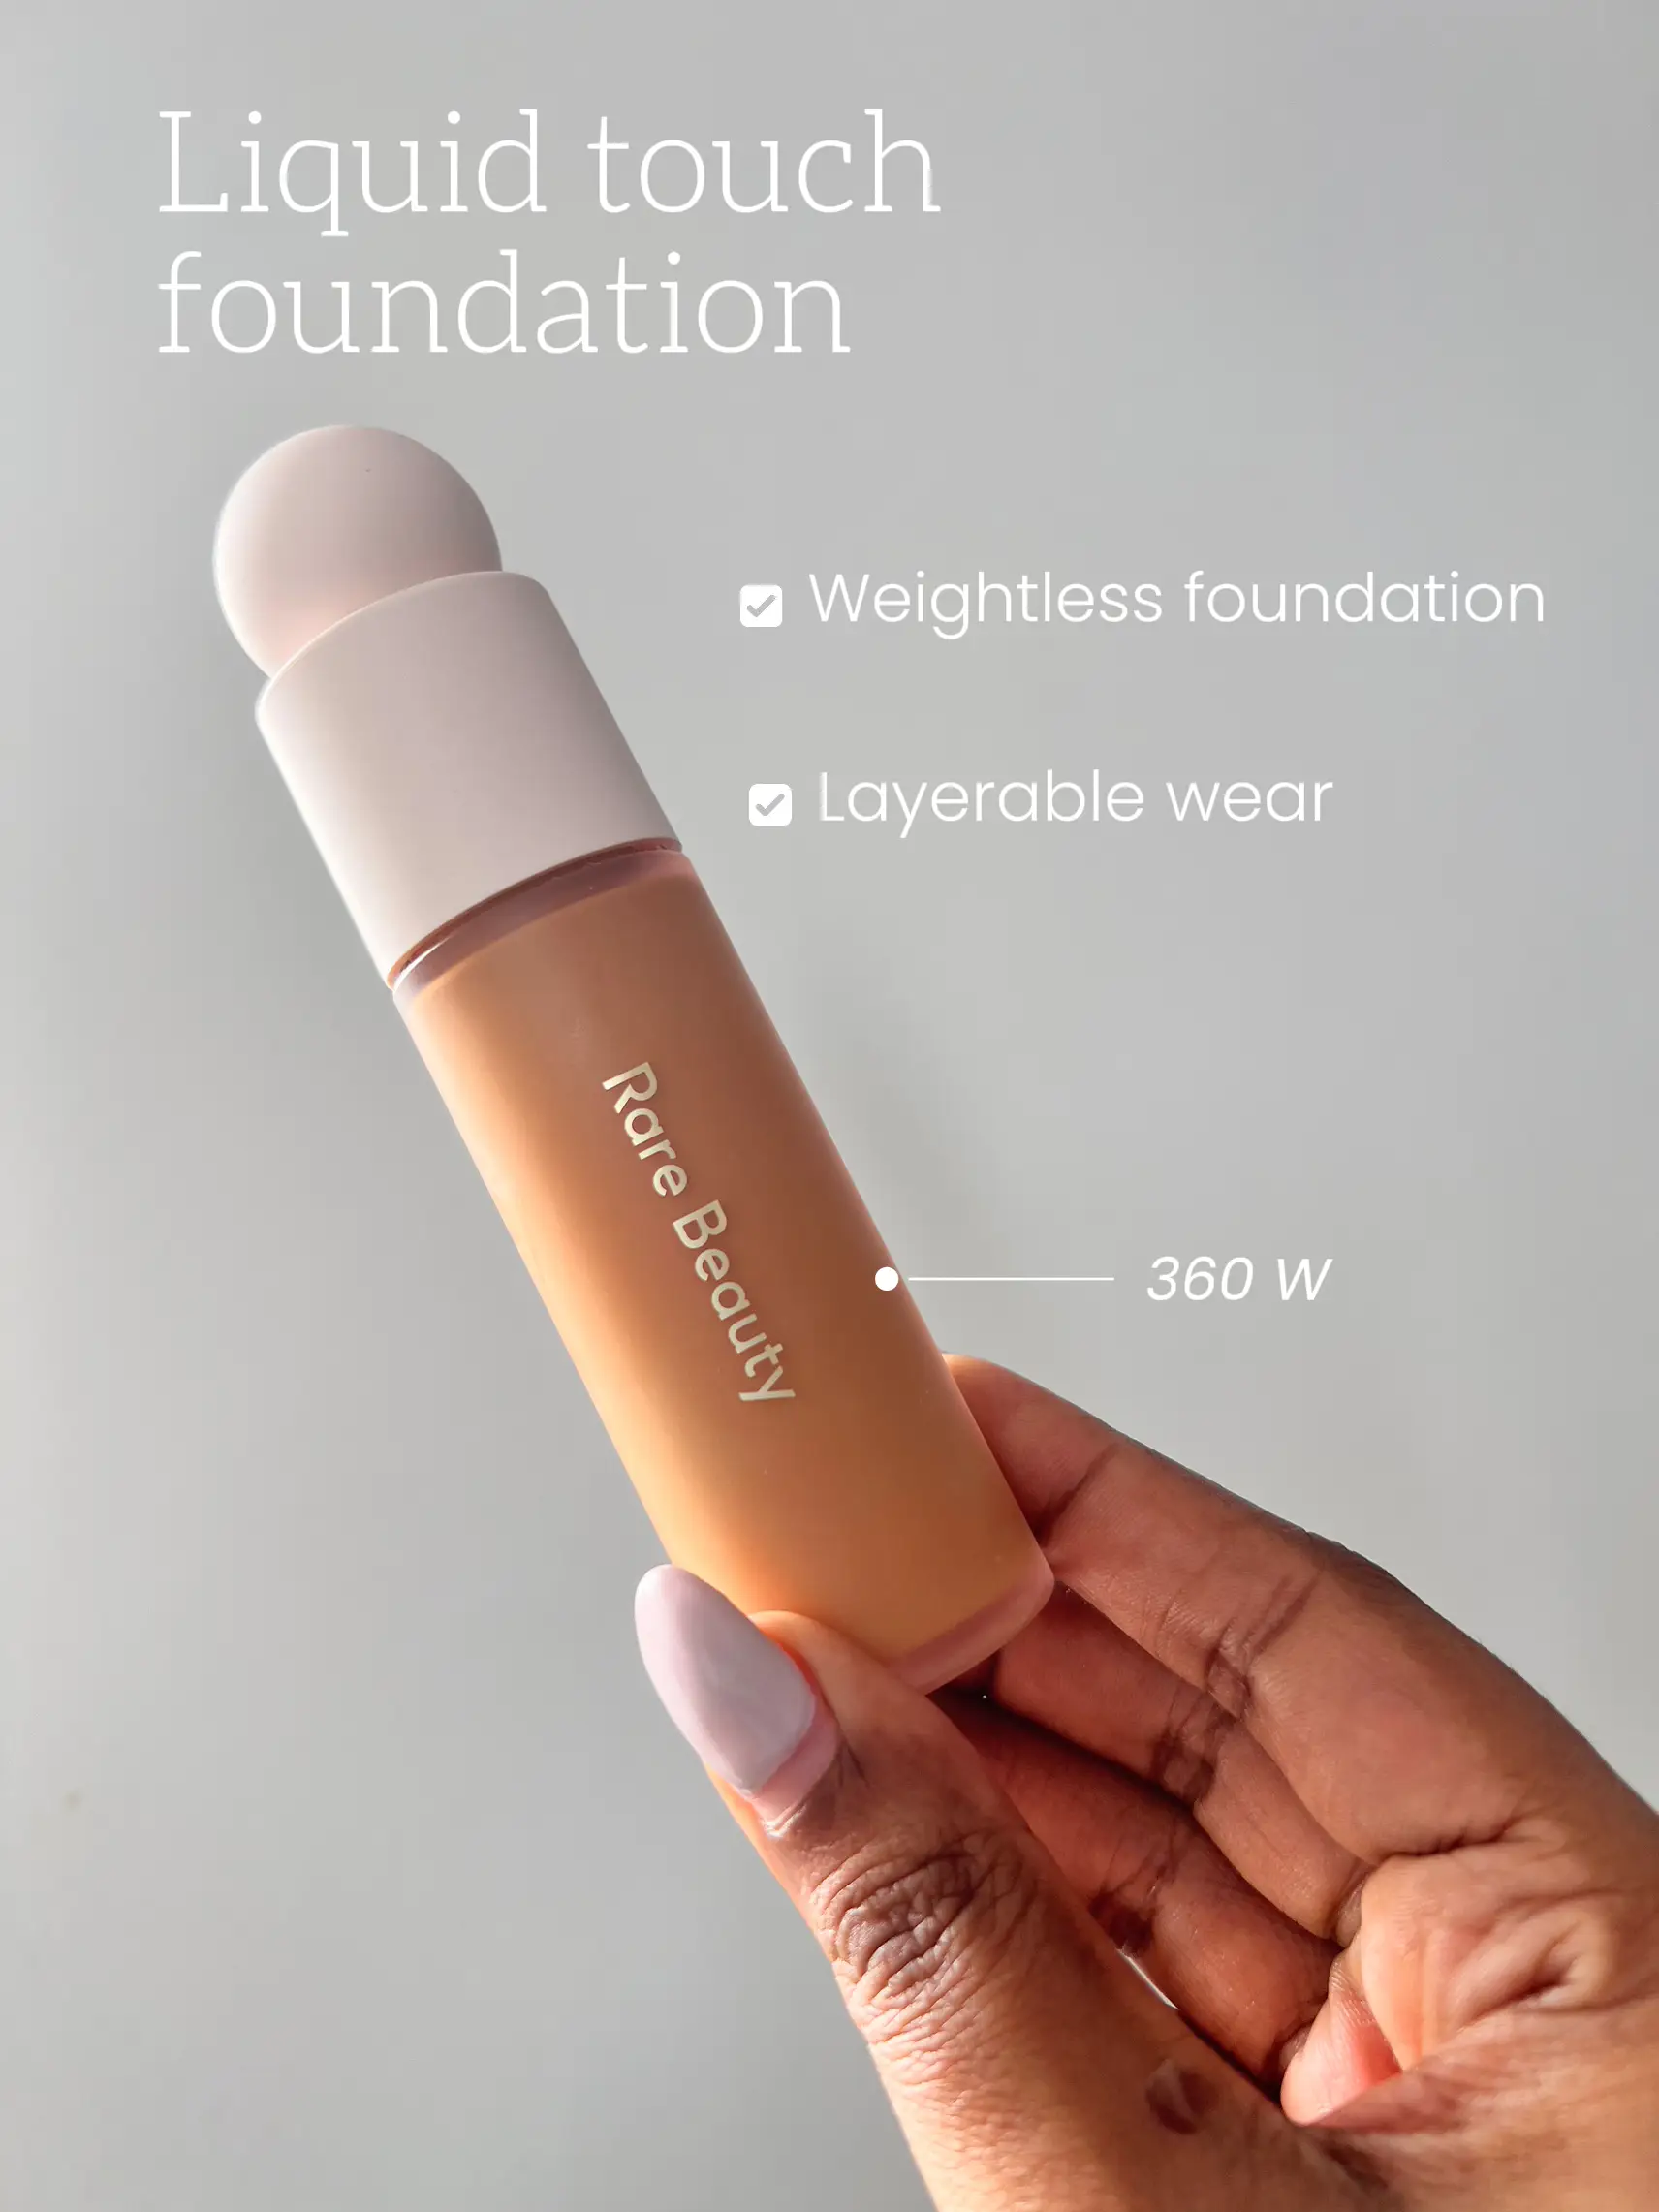 Rare beauty liquid touch foundation is lit 🔥